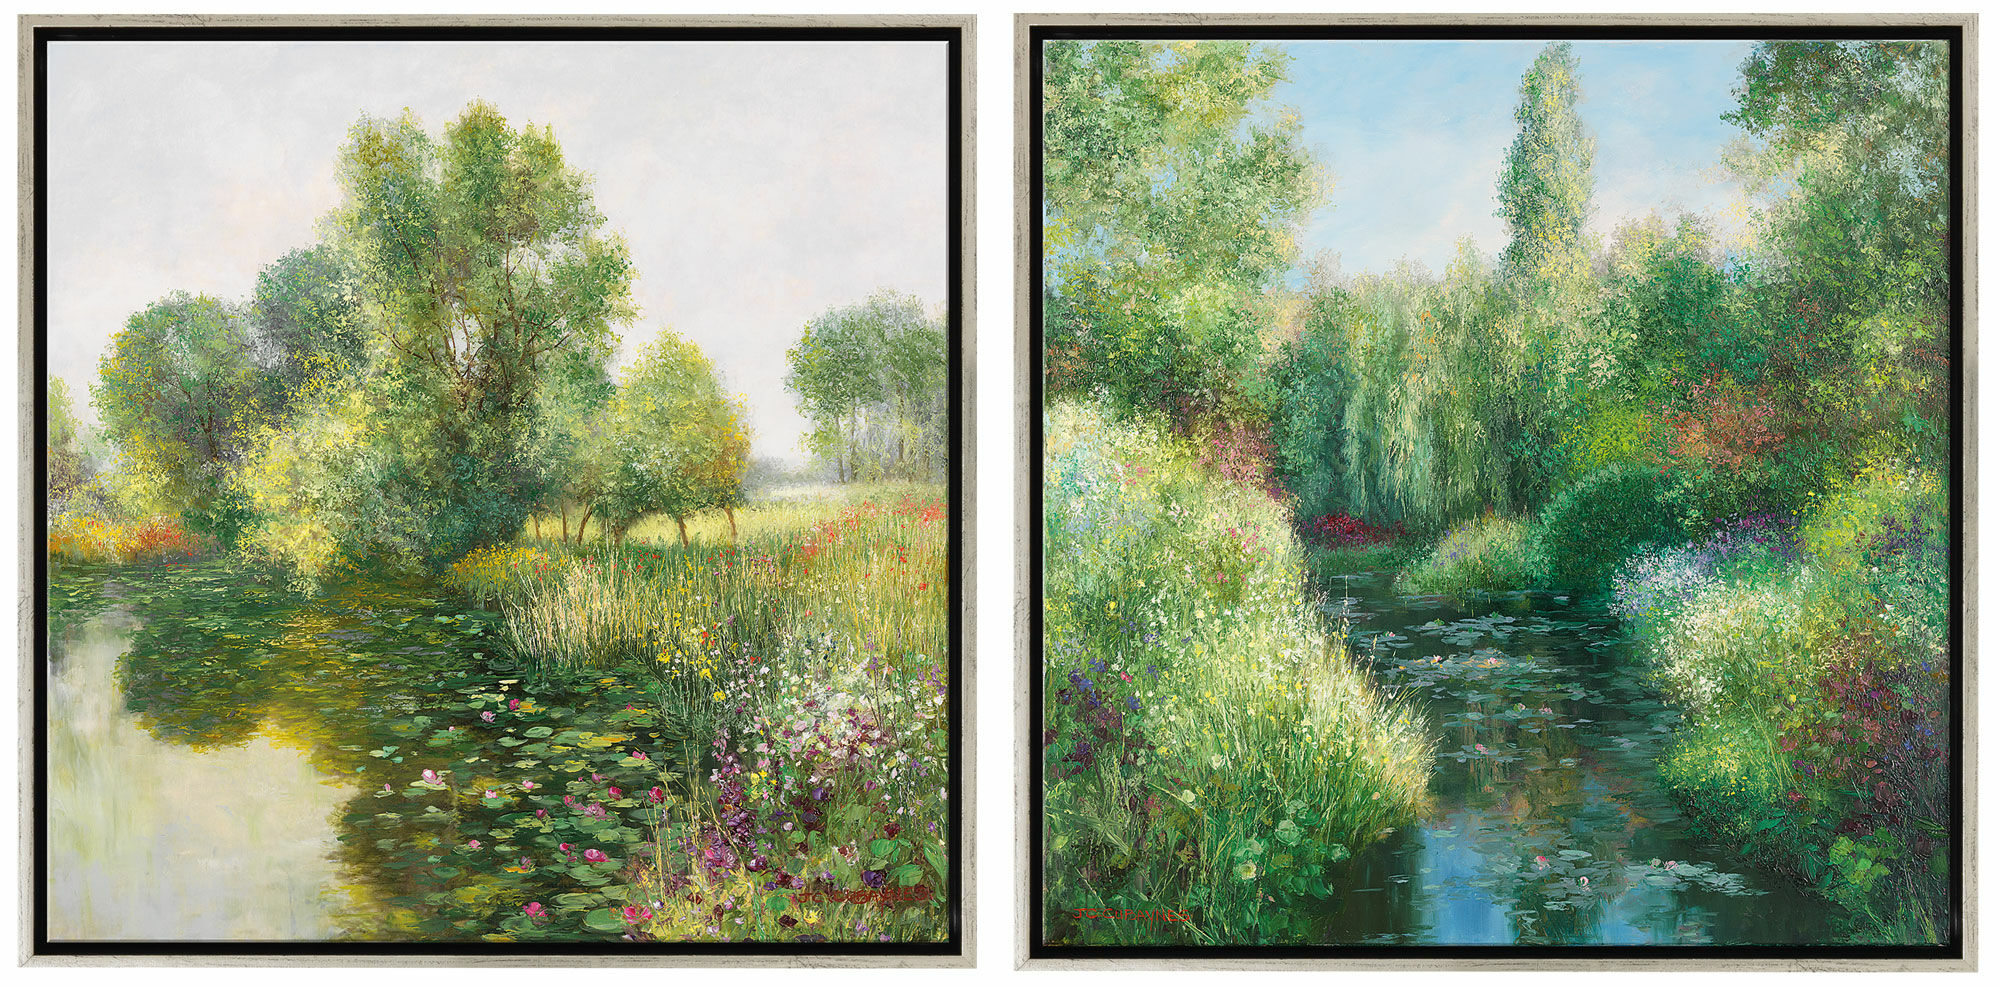 Set of 2 pictures "Giverny" + "Juin à Giverny", silver-coloured framed version by Jean-Claude Cubaynes